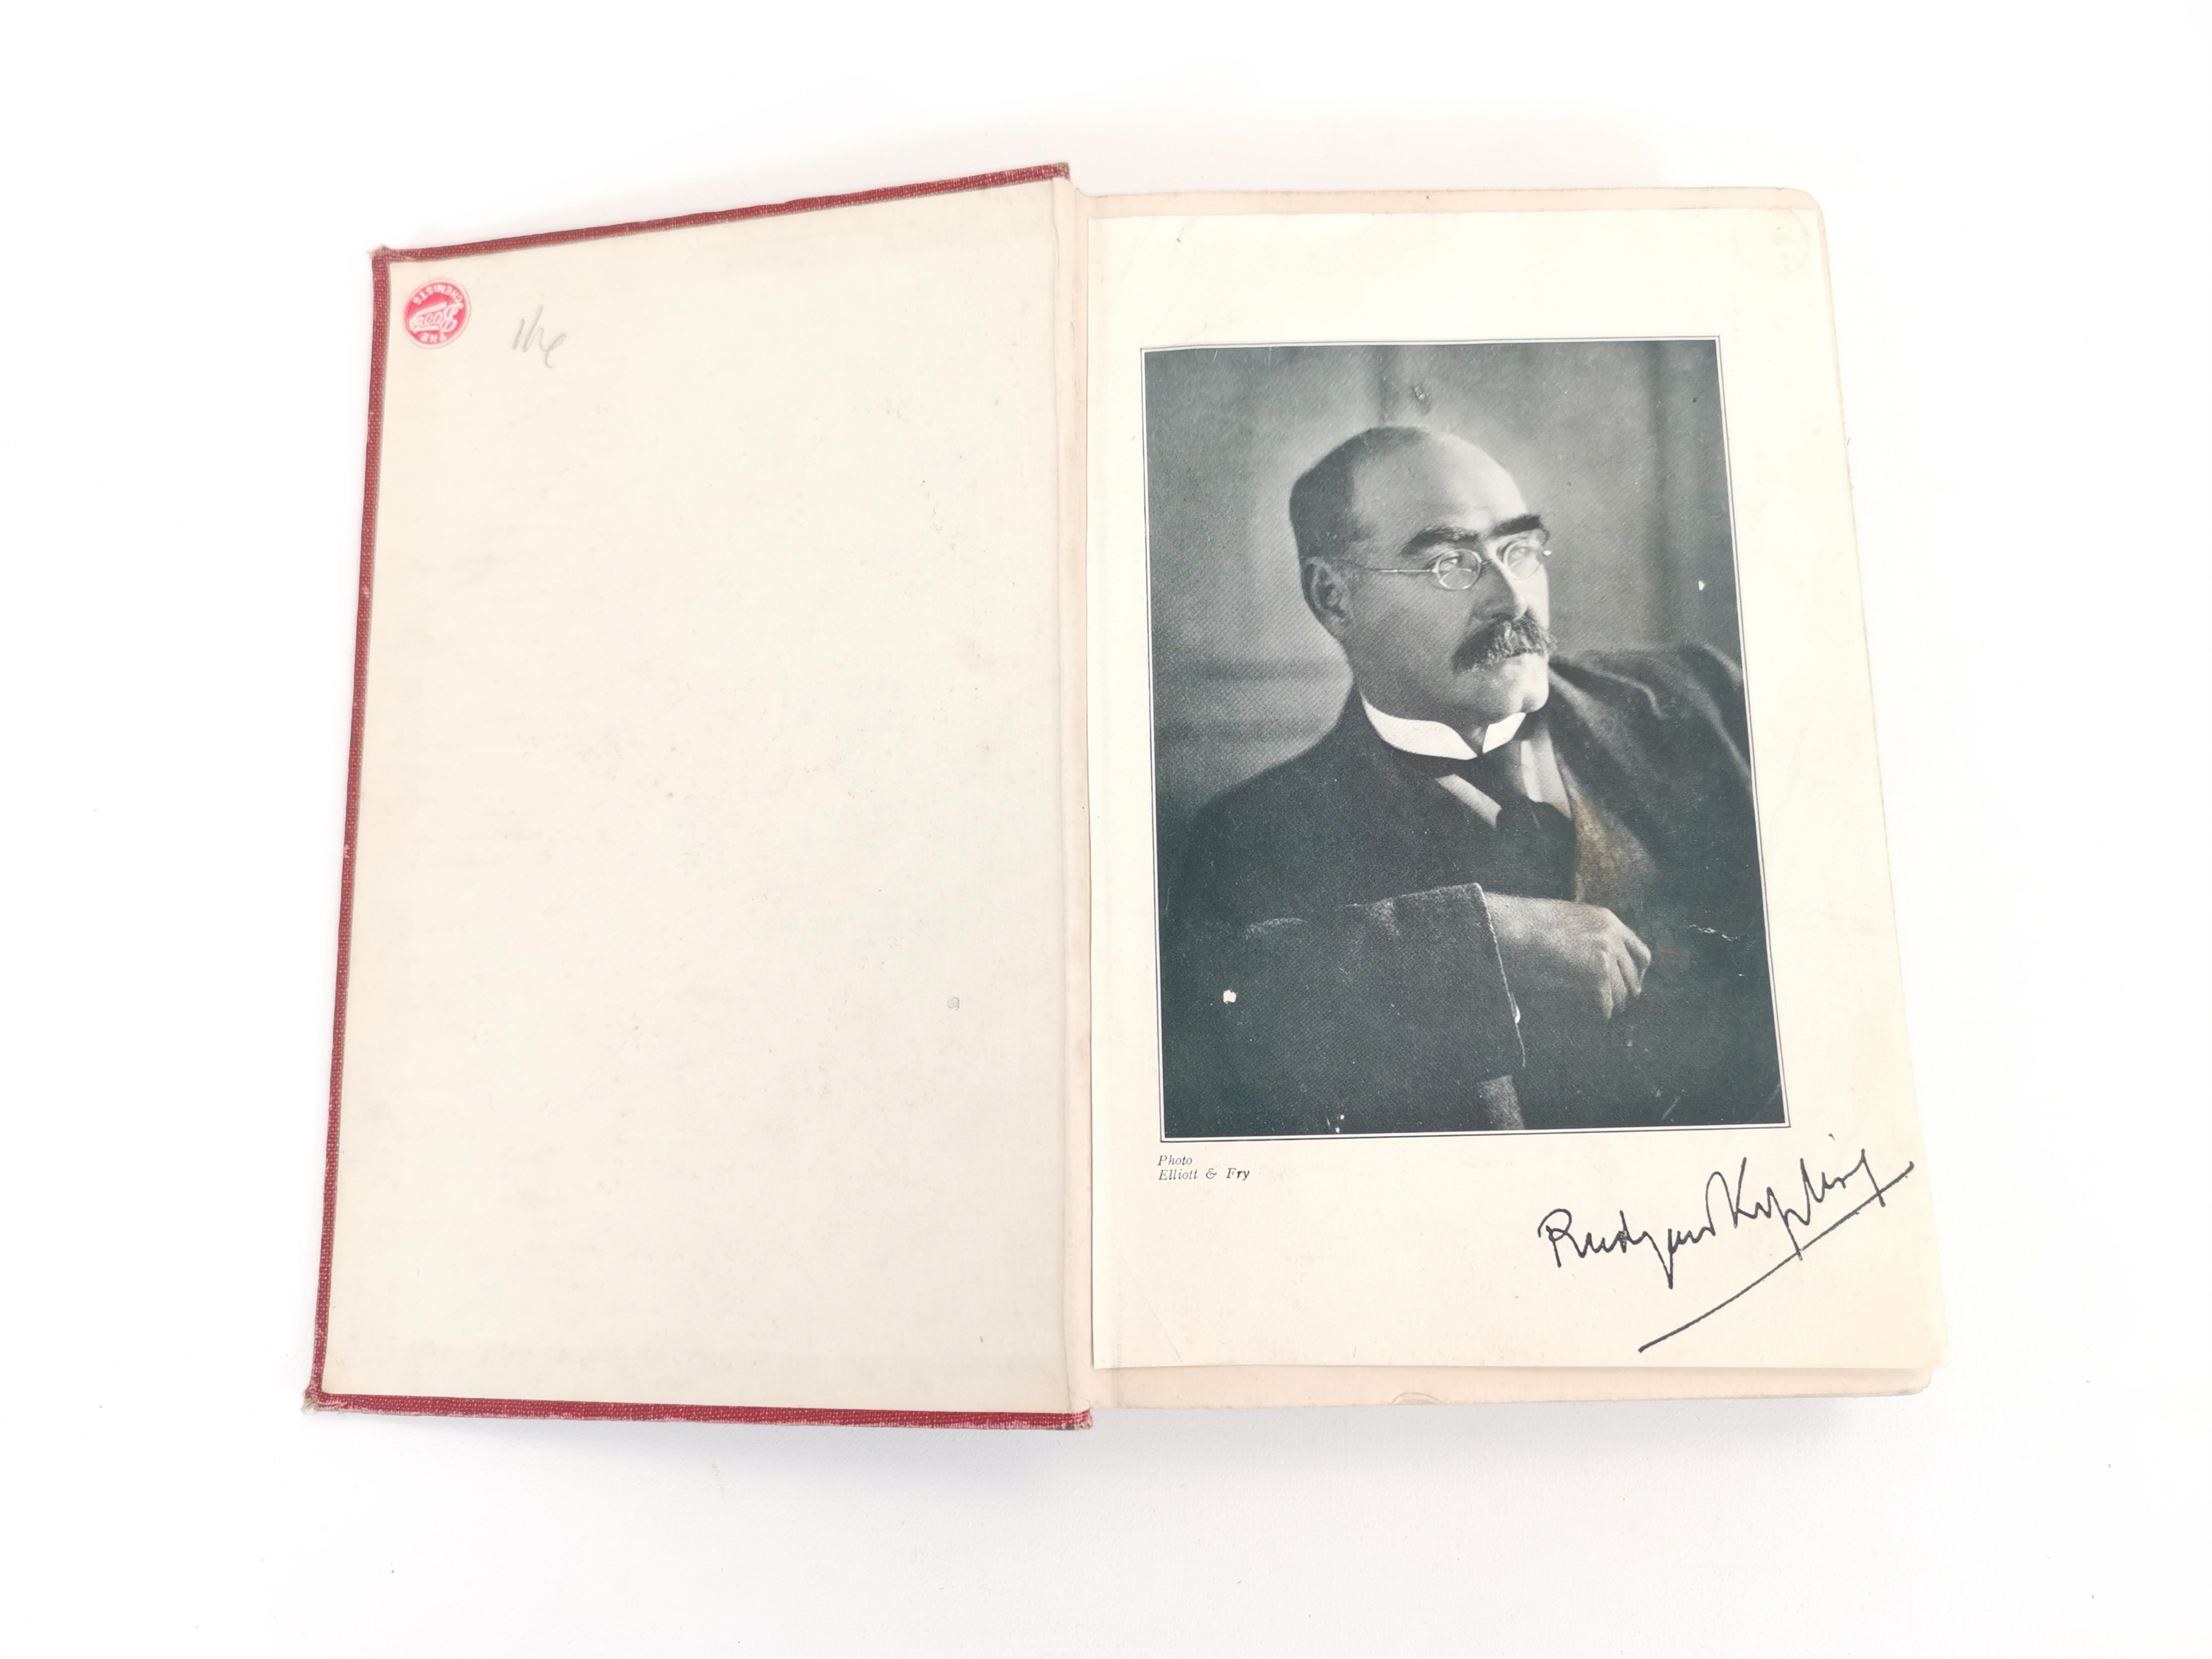 Rudyard Kipling (1865-1936) 'Something of Myself', for my friends known and unknown' Macmillan and